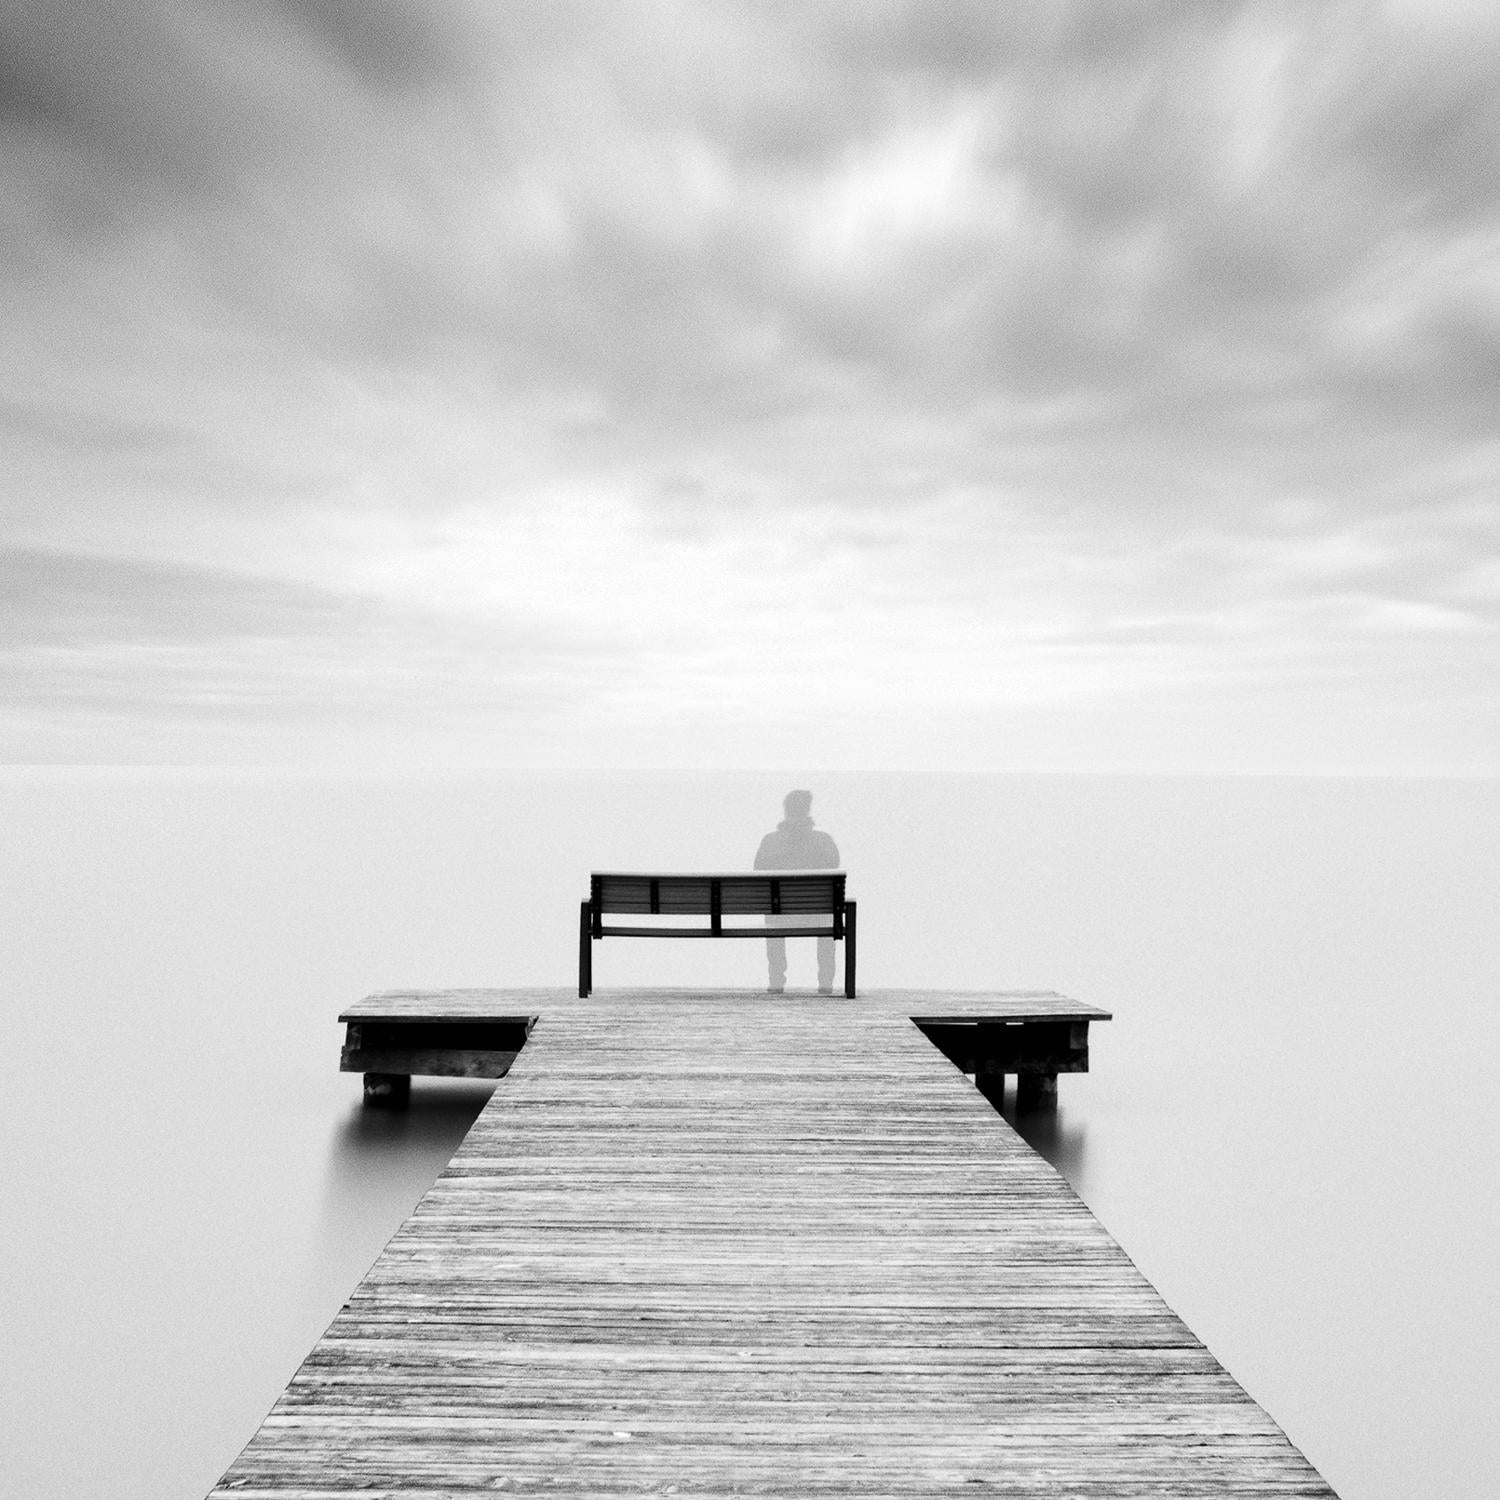 Self Portrait, Pier, Austria, black and white gelatin silver photography, framed - Contemporary Photograph by Gerald Berghammer